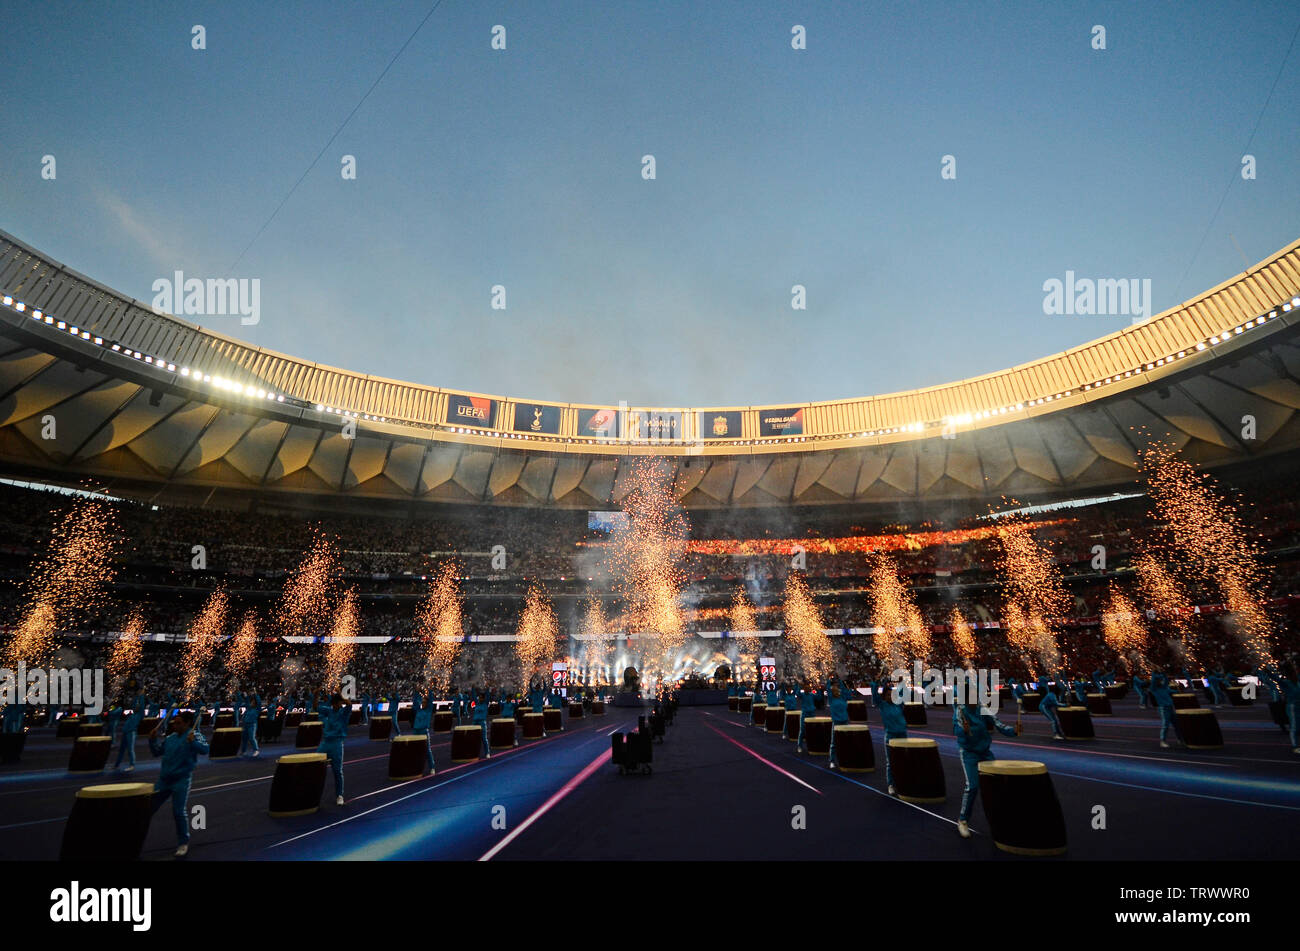 MADRID, SPAIN - JUNE 1, 2019: The opening ceremony held prior to the 2018/19 UEFA Champions League Final between Tottenham Hotspur (England) and Liverpool FC (England) at Wanda Metropolitano. Stock Photo